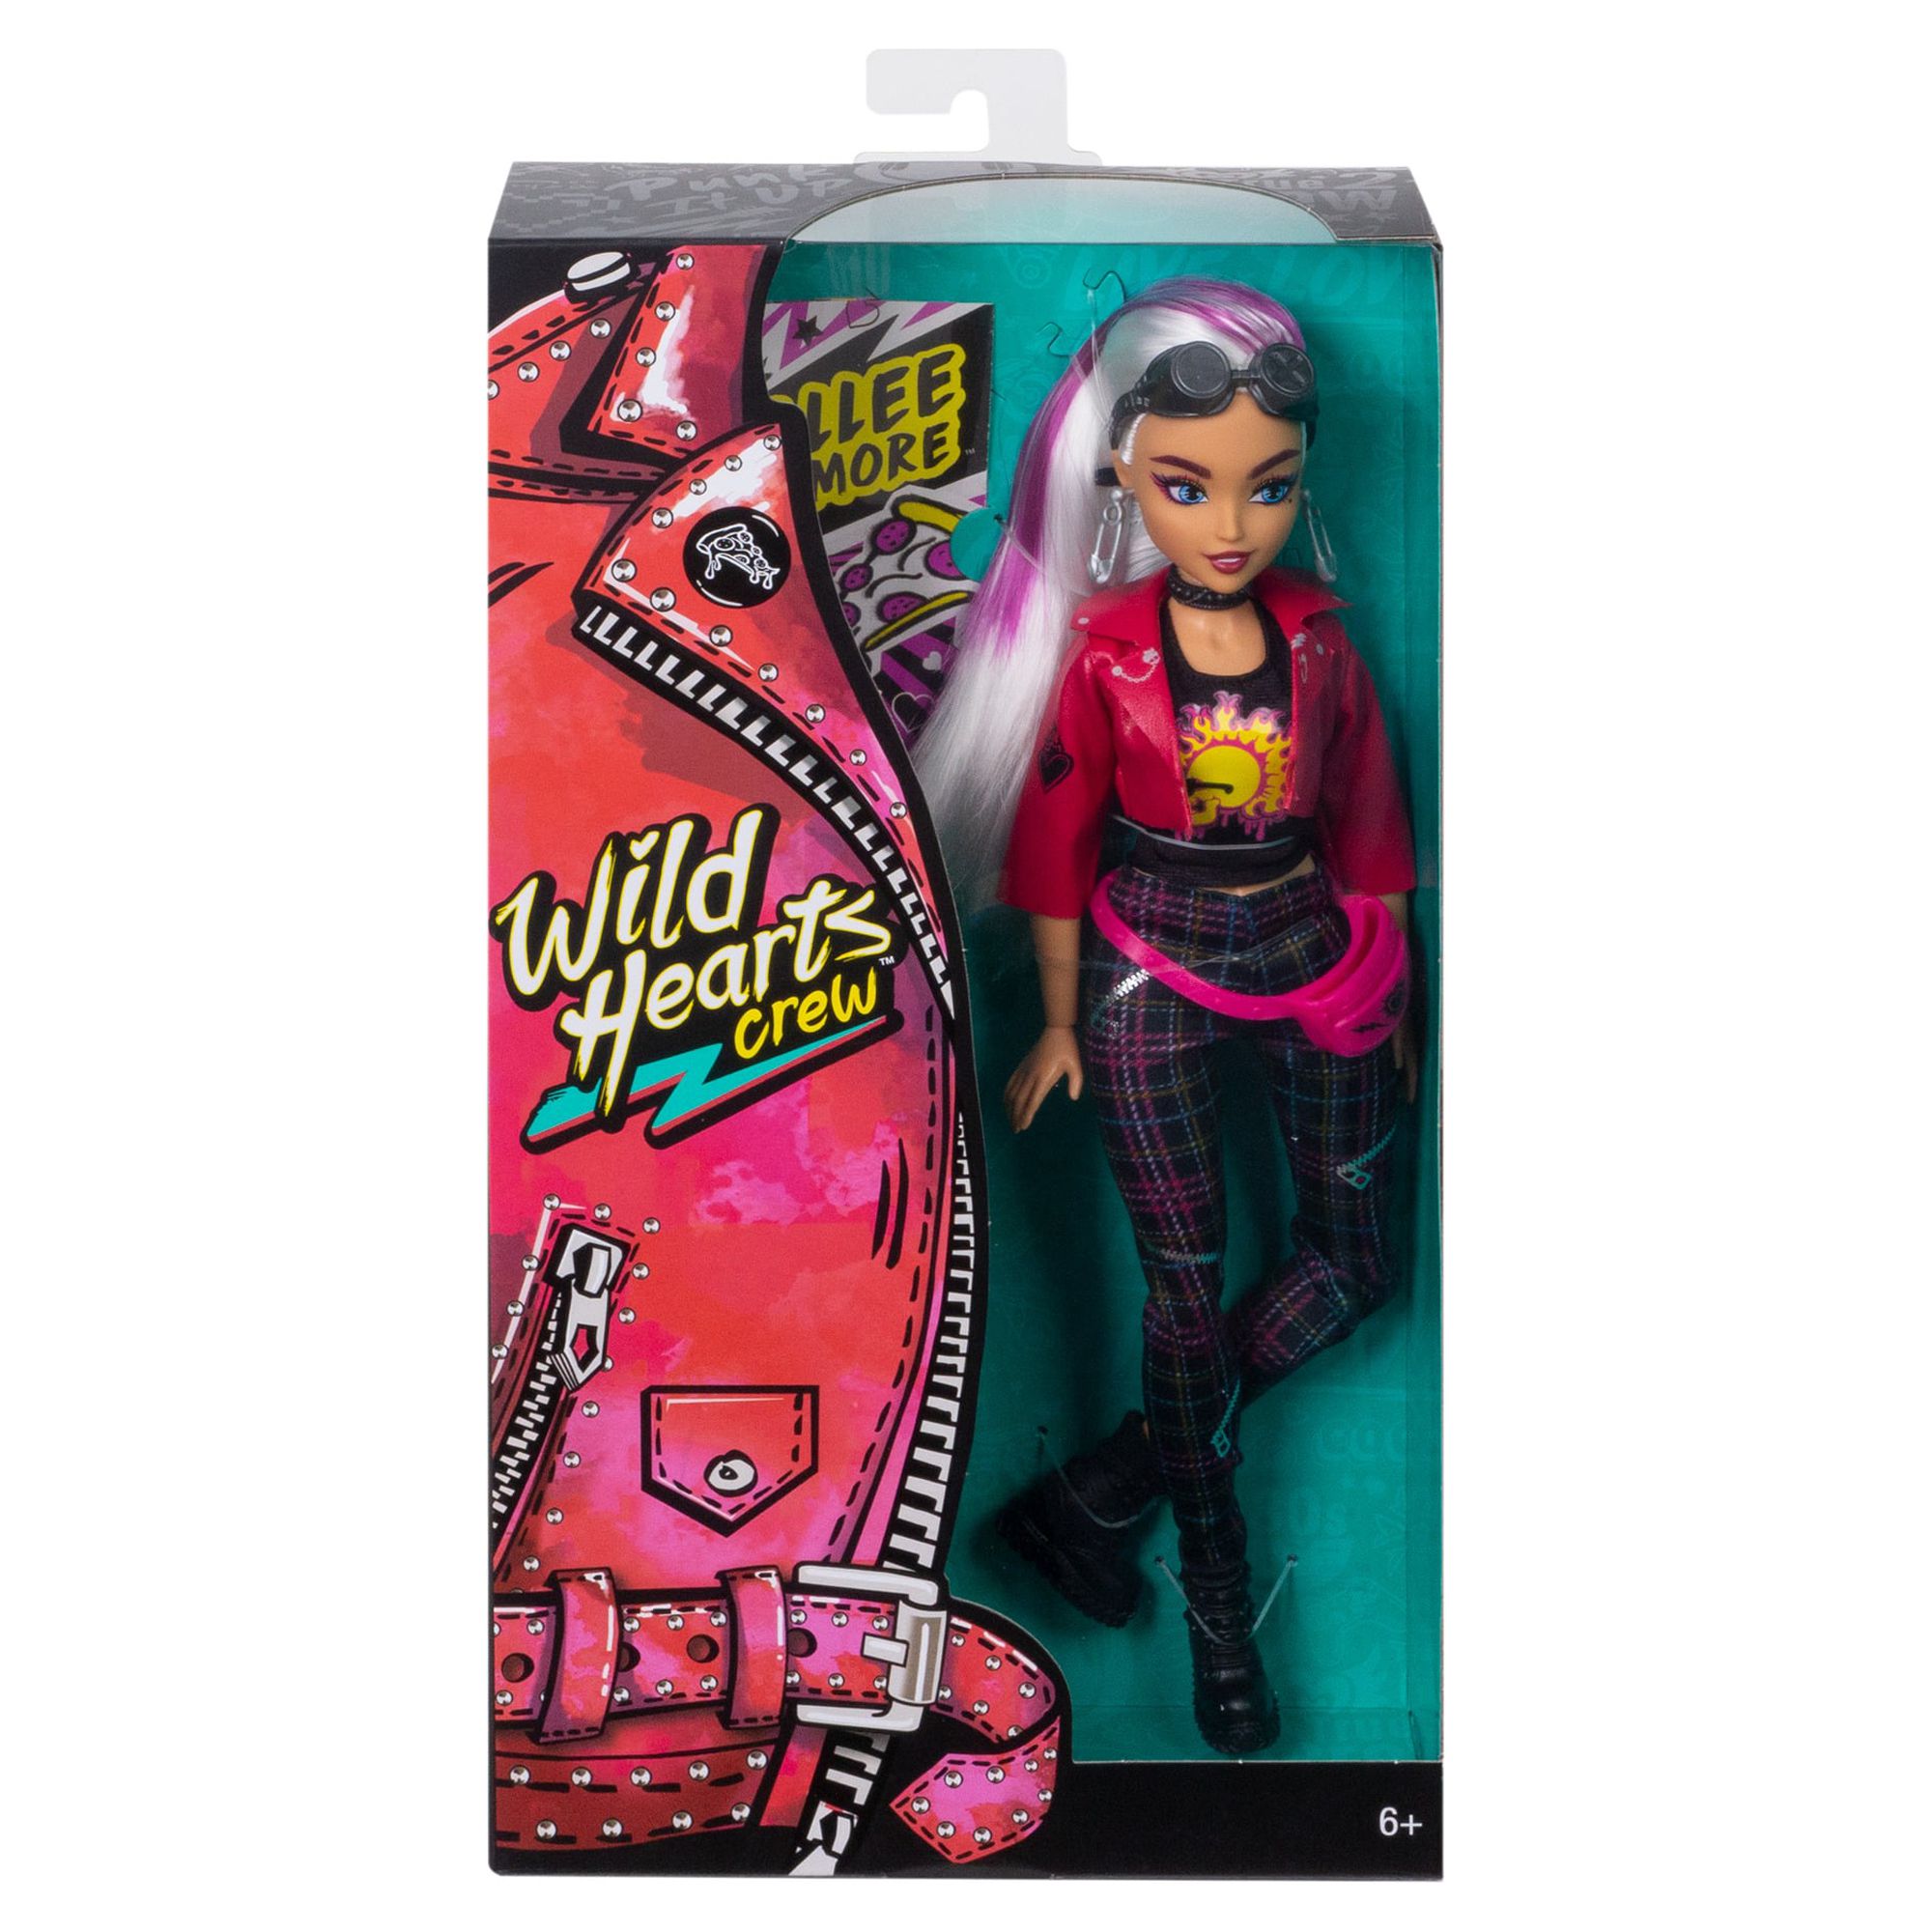 Wild Hearts Crew Rallee Radmore Doll with Style Accessories - image 3 of 10